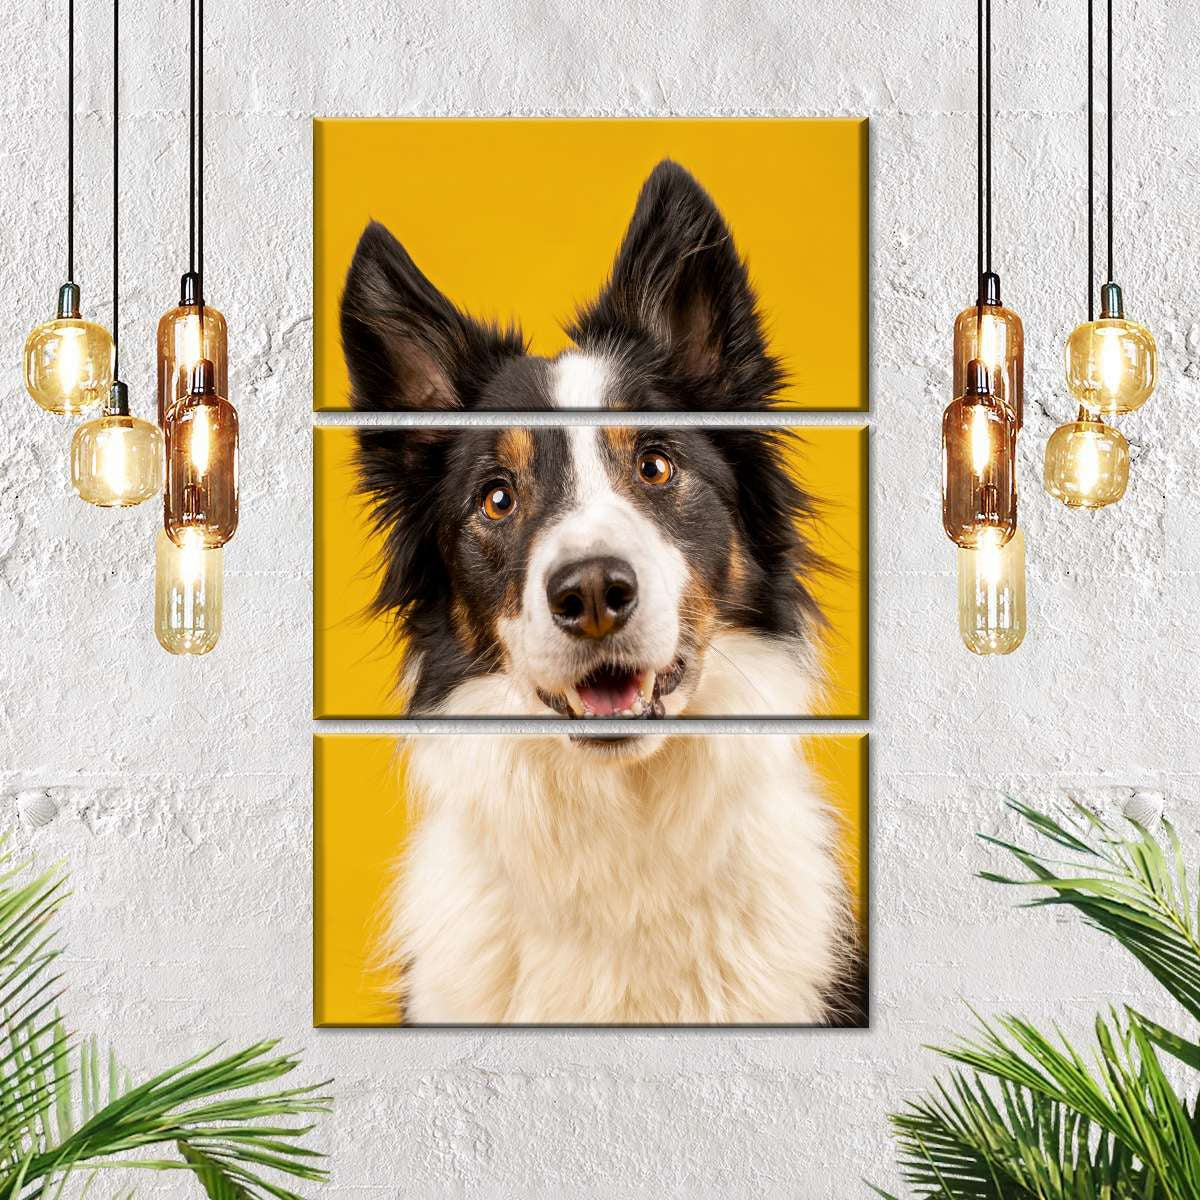 Furry Wall Art for Sale